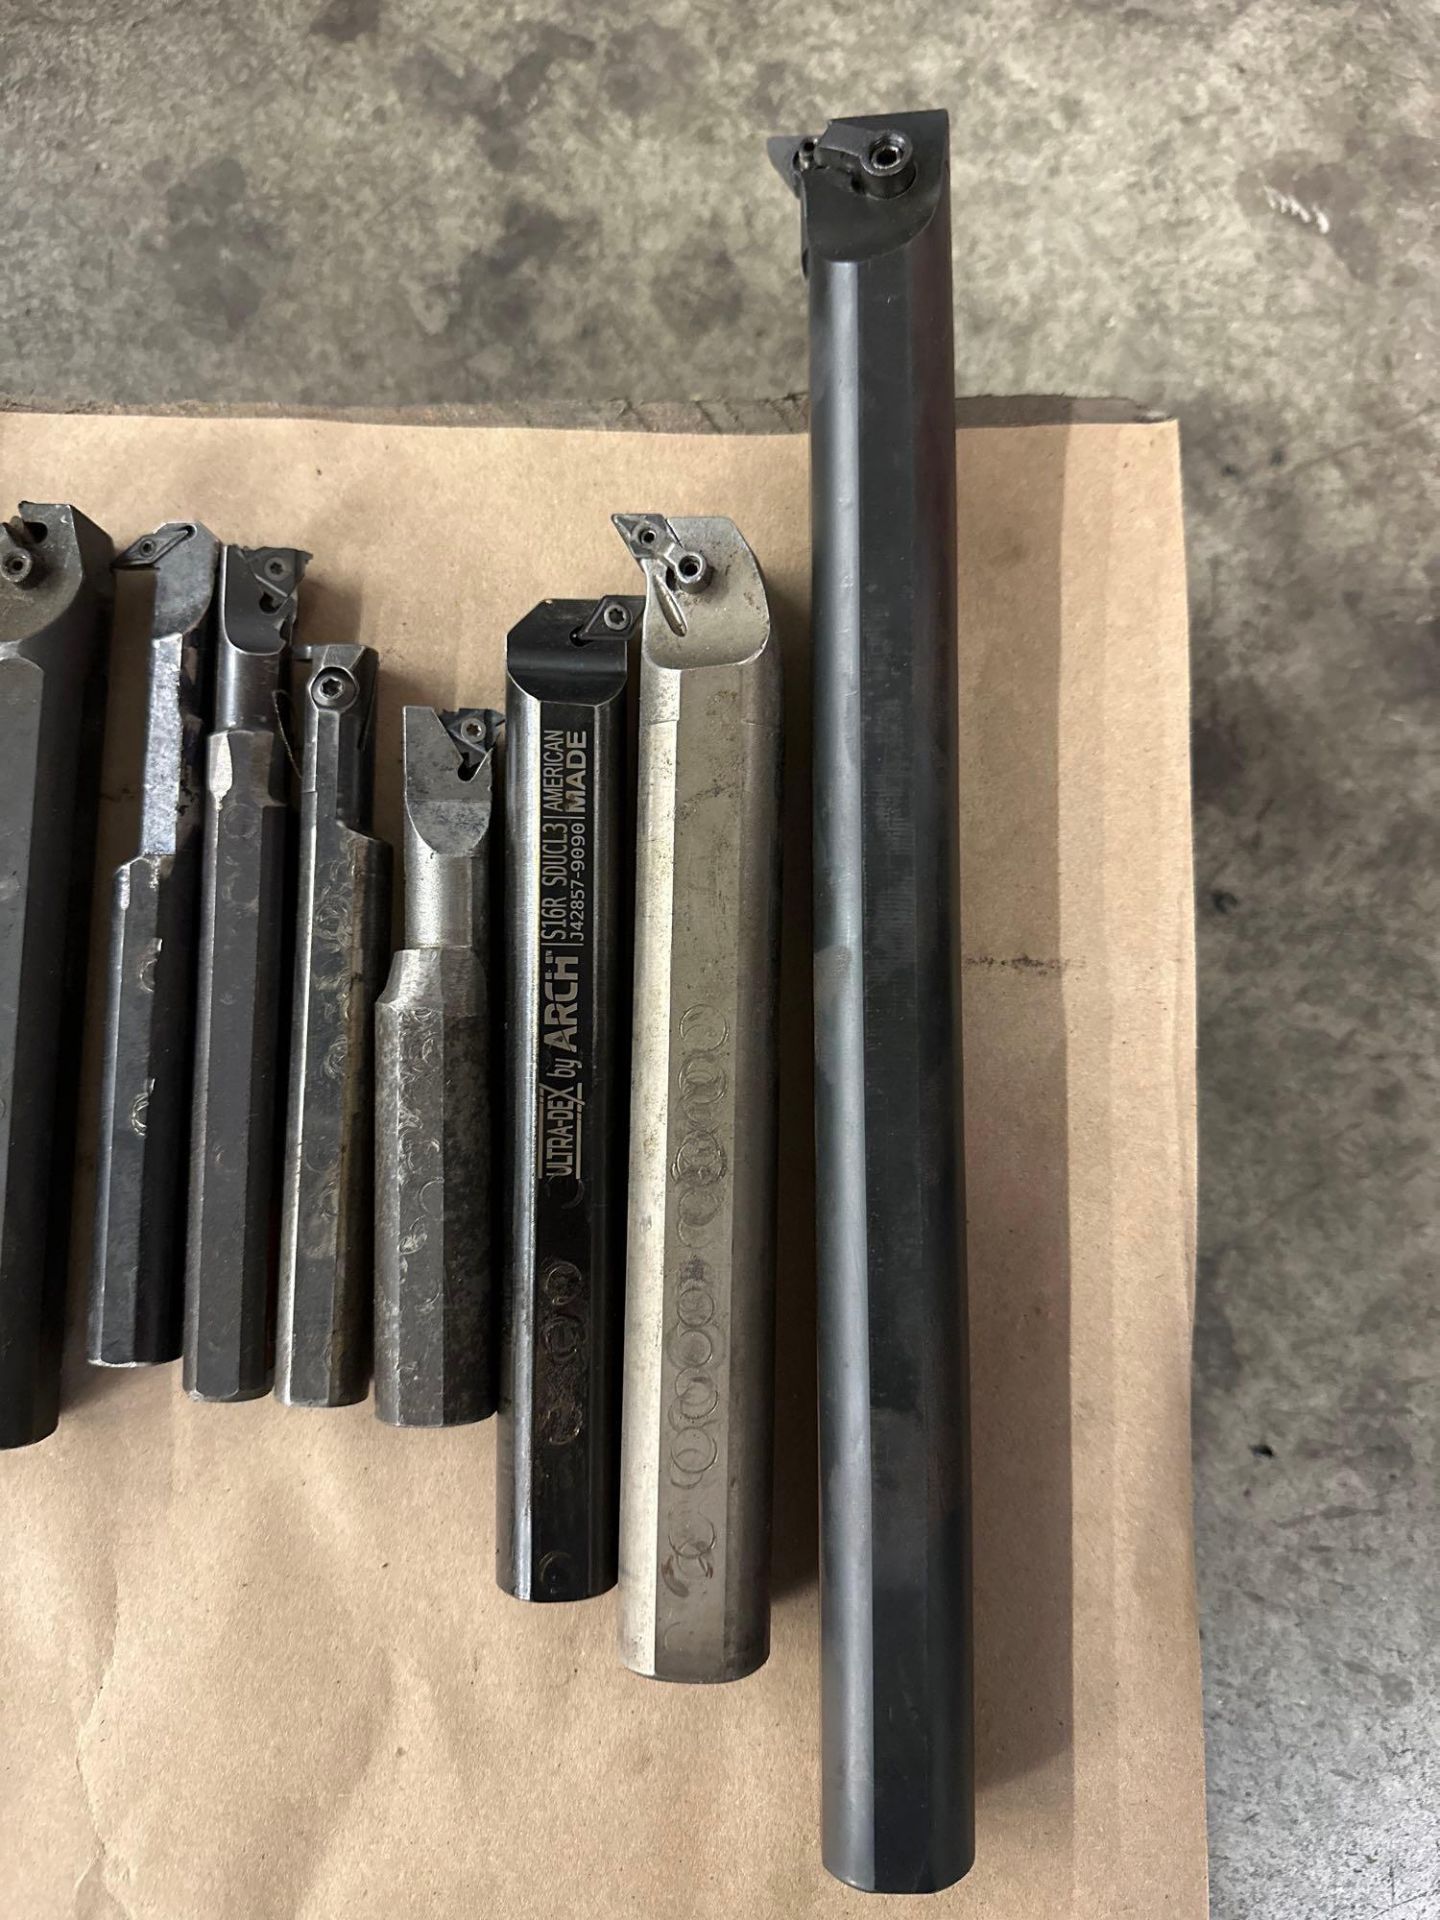 Lot of 11 Assorted Indexable Boring Bars Ranging From: 1/2” X 5” to 1” X 10” - Image 2 of 7